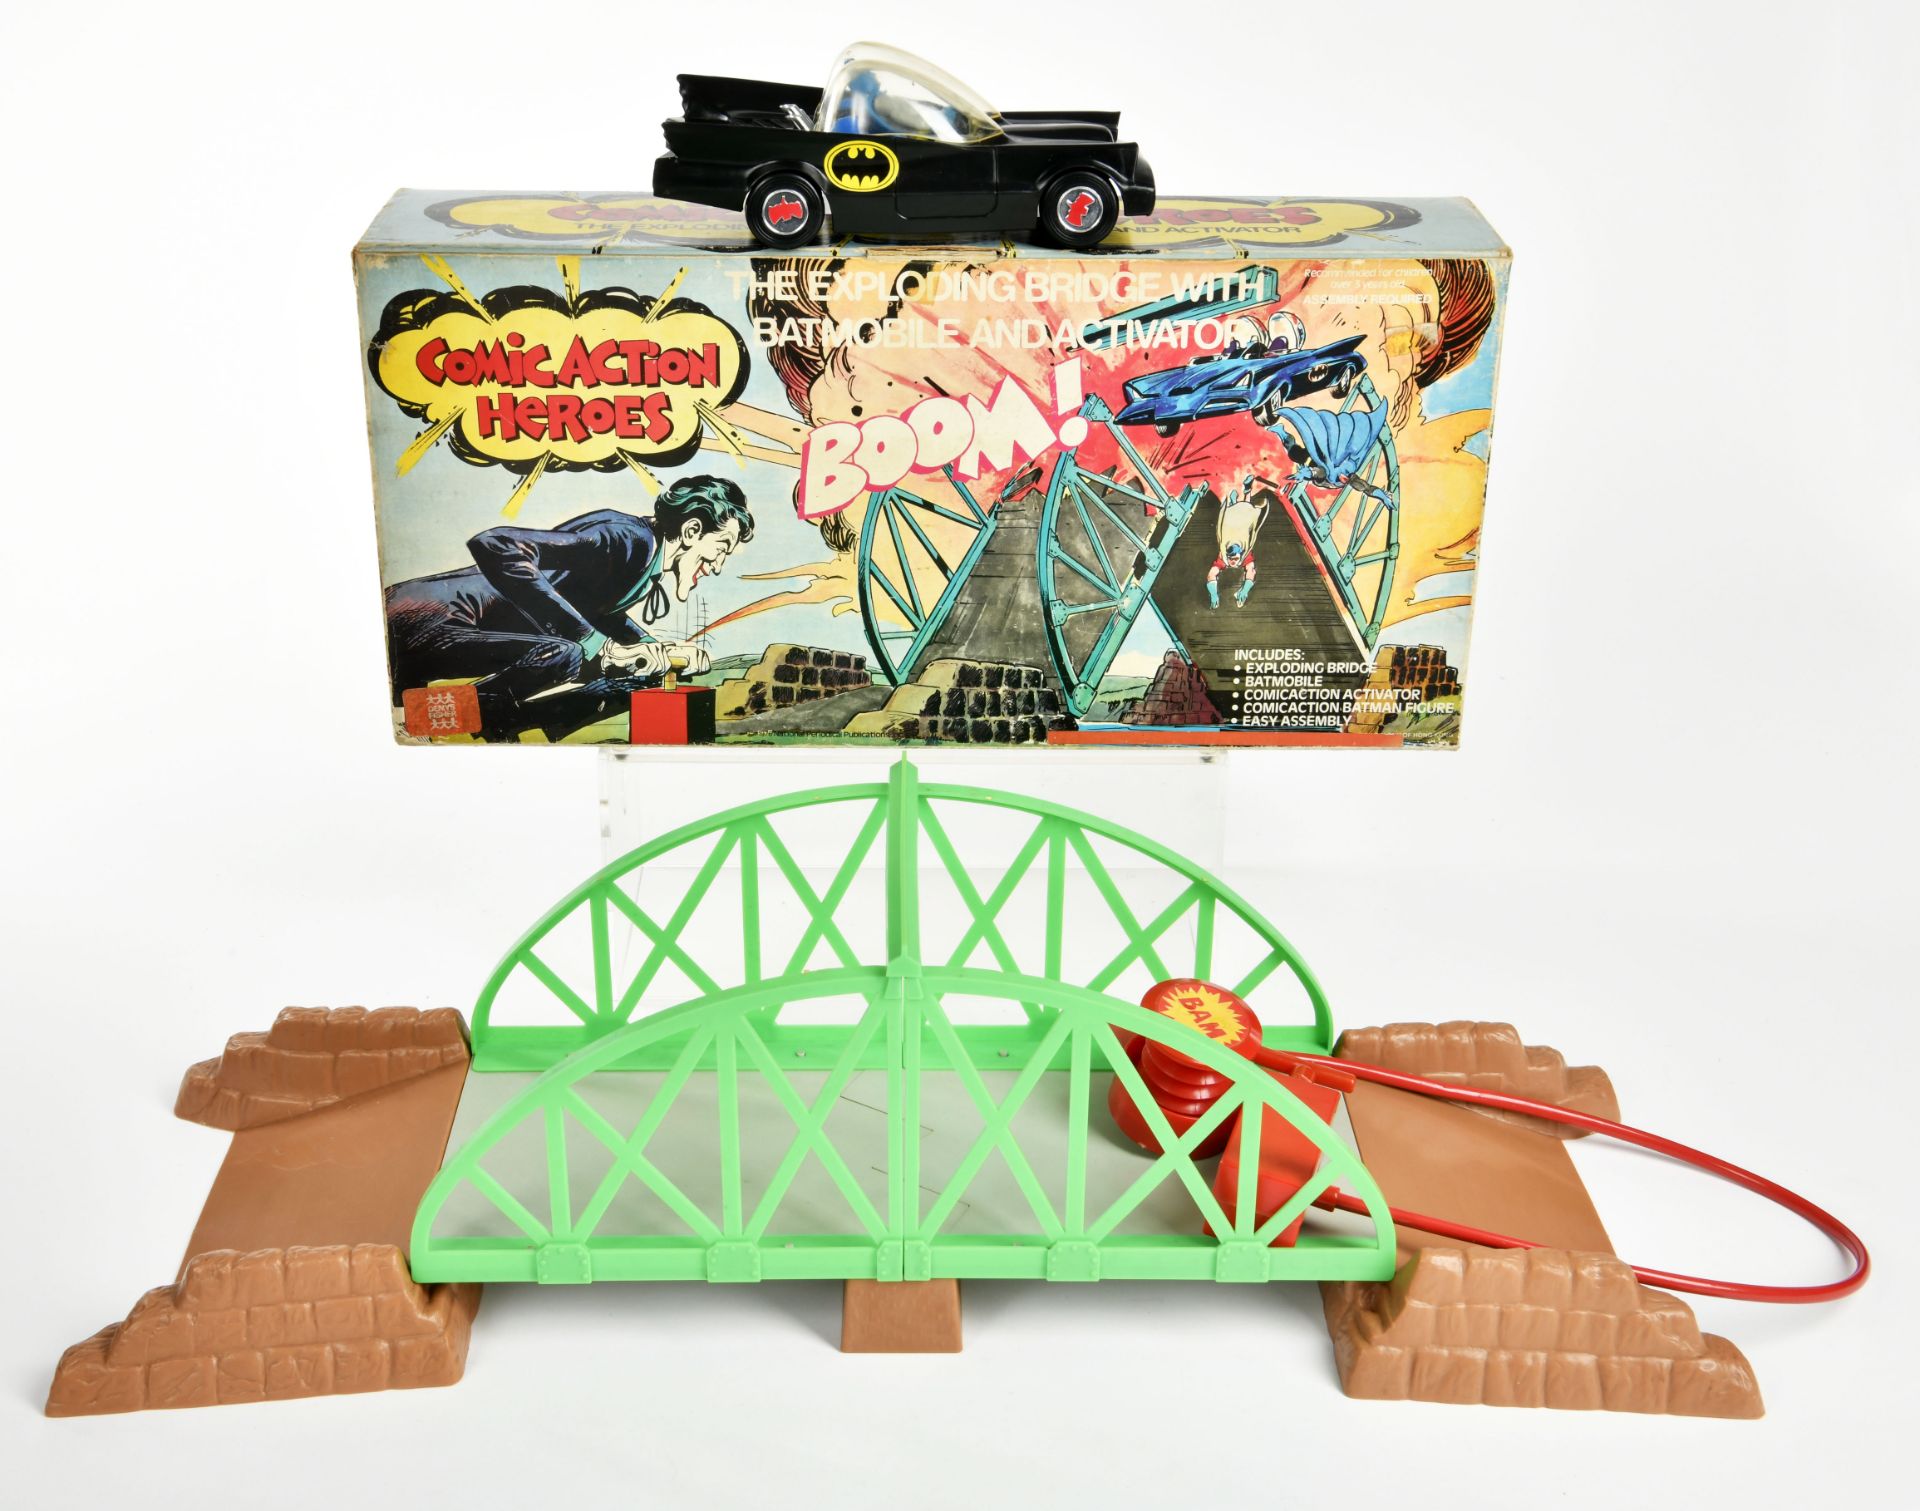 Batman Comic Action Heroes, The Exploding Bridge With Batmobile And Activator